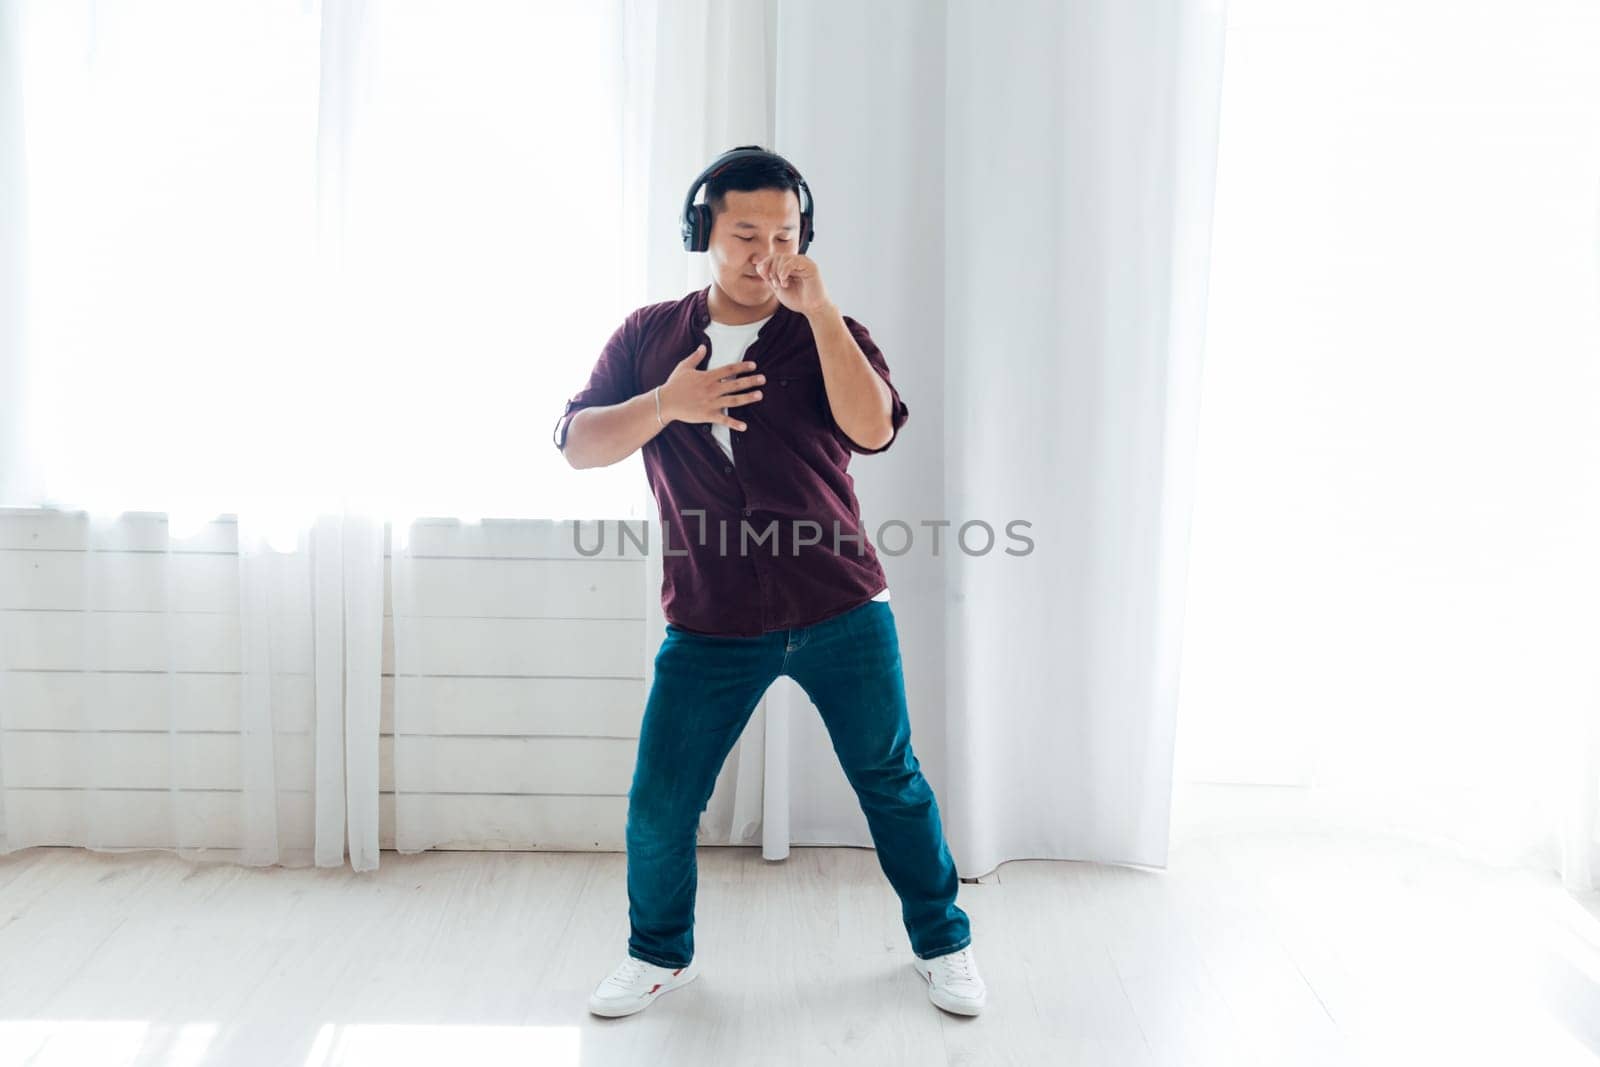 A man listens to music with headphones and dances